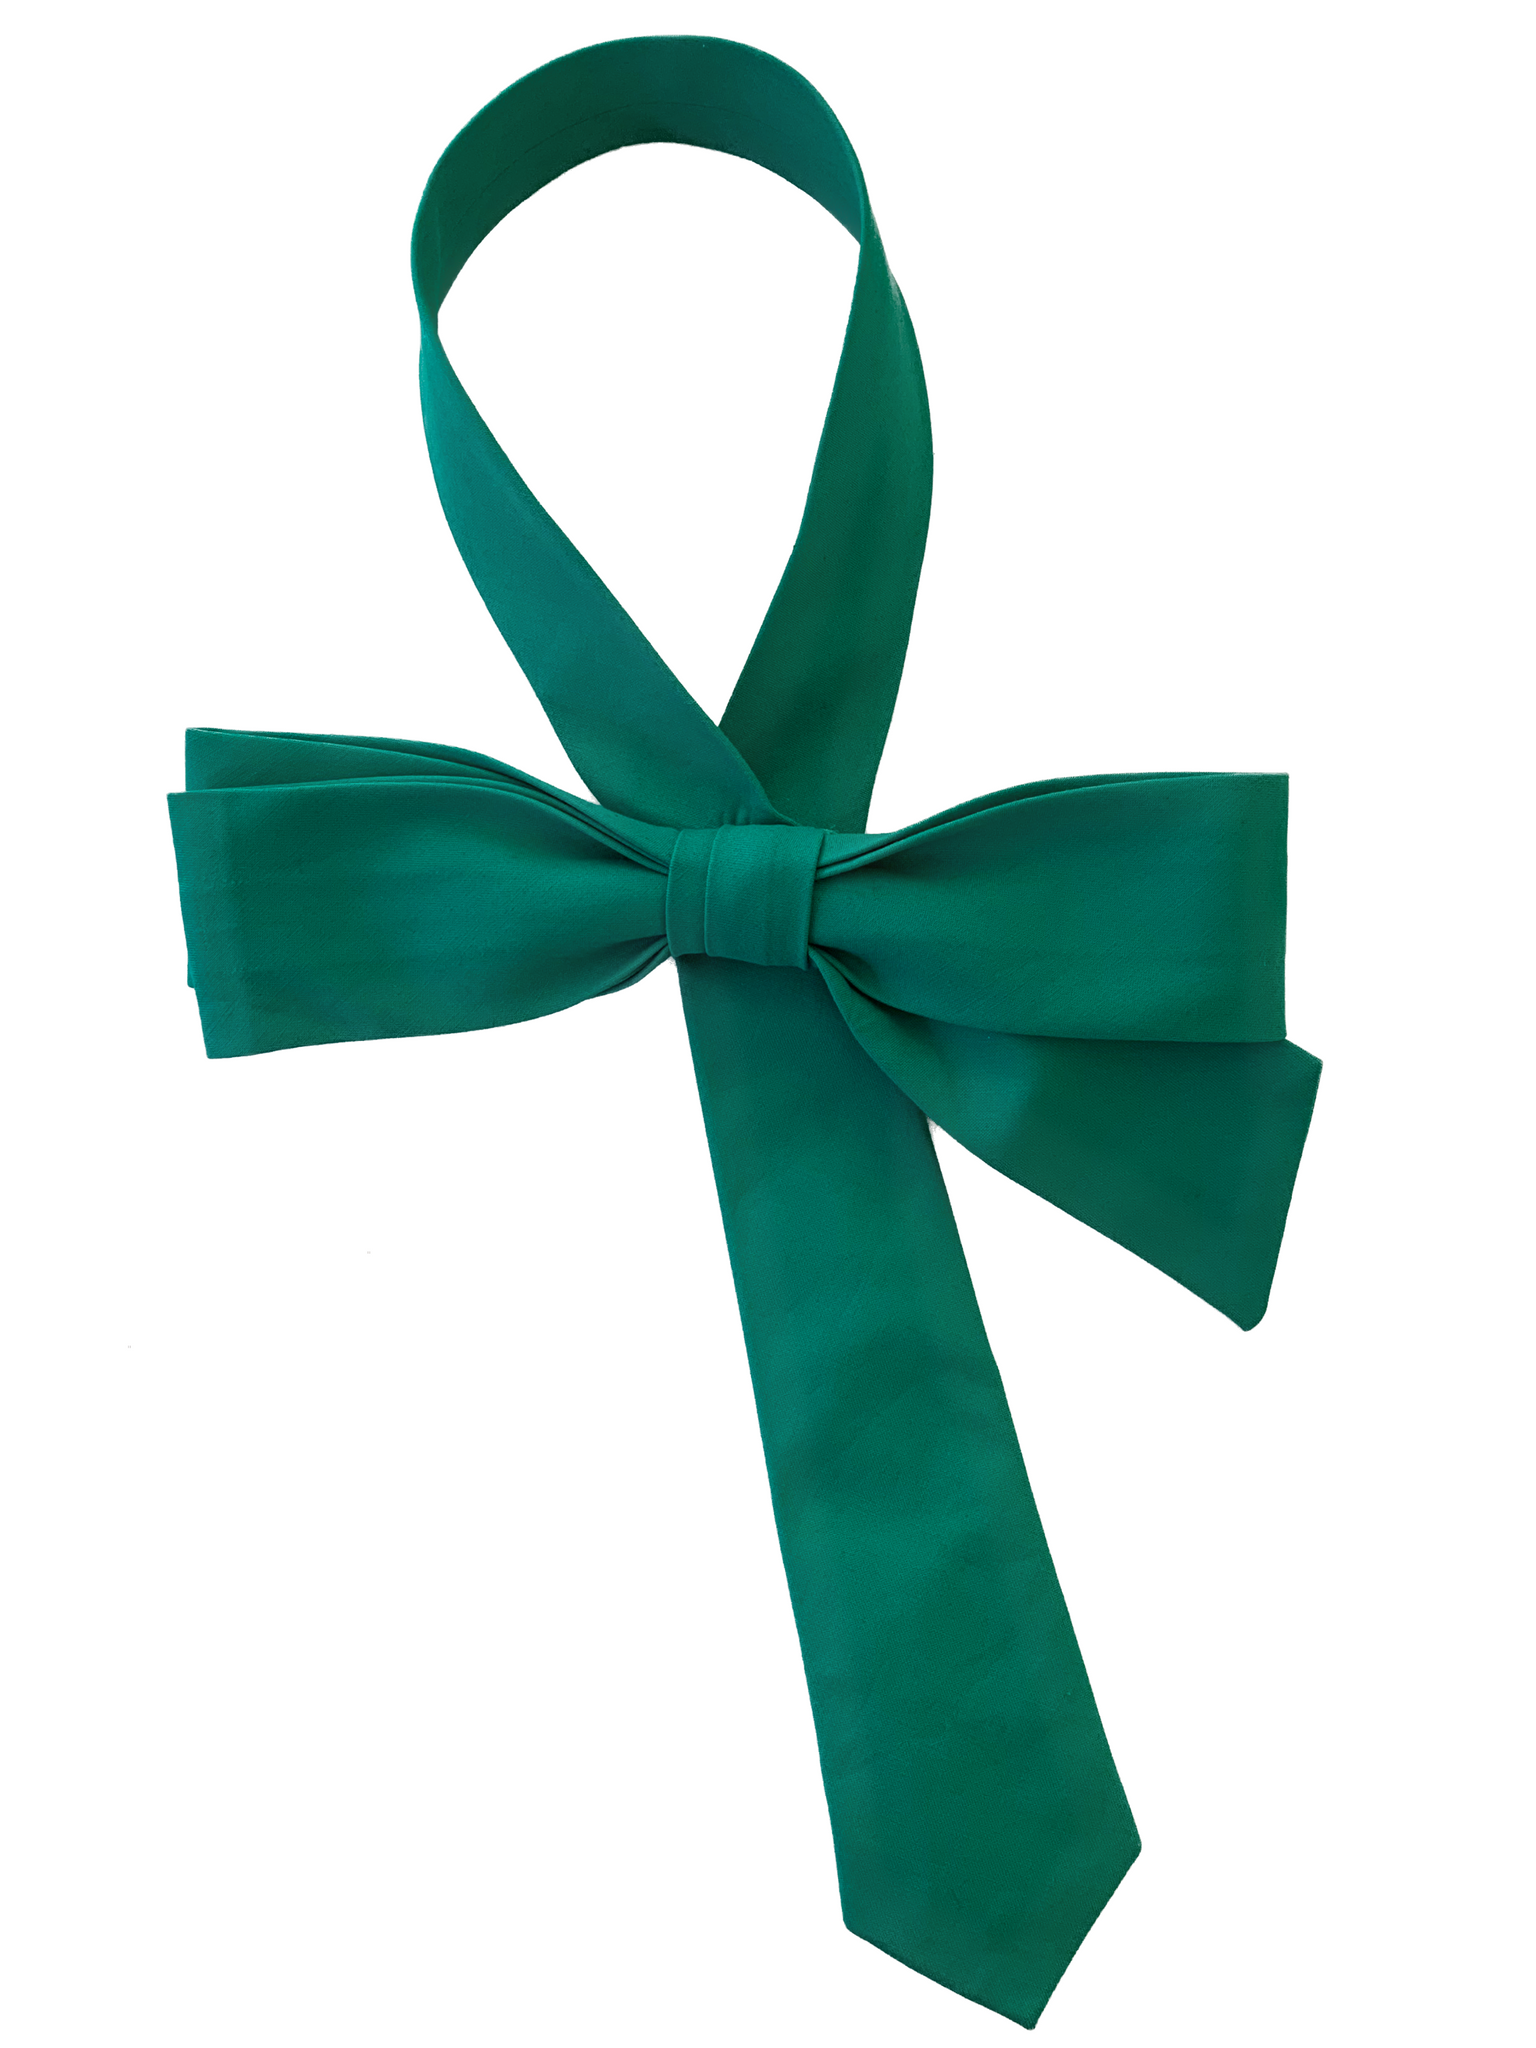 The Emerald Green Grace Bow